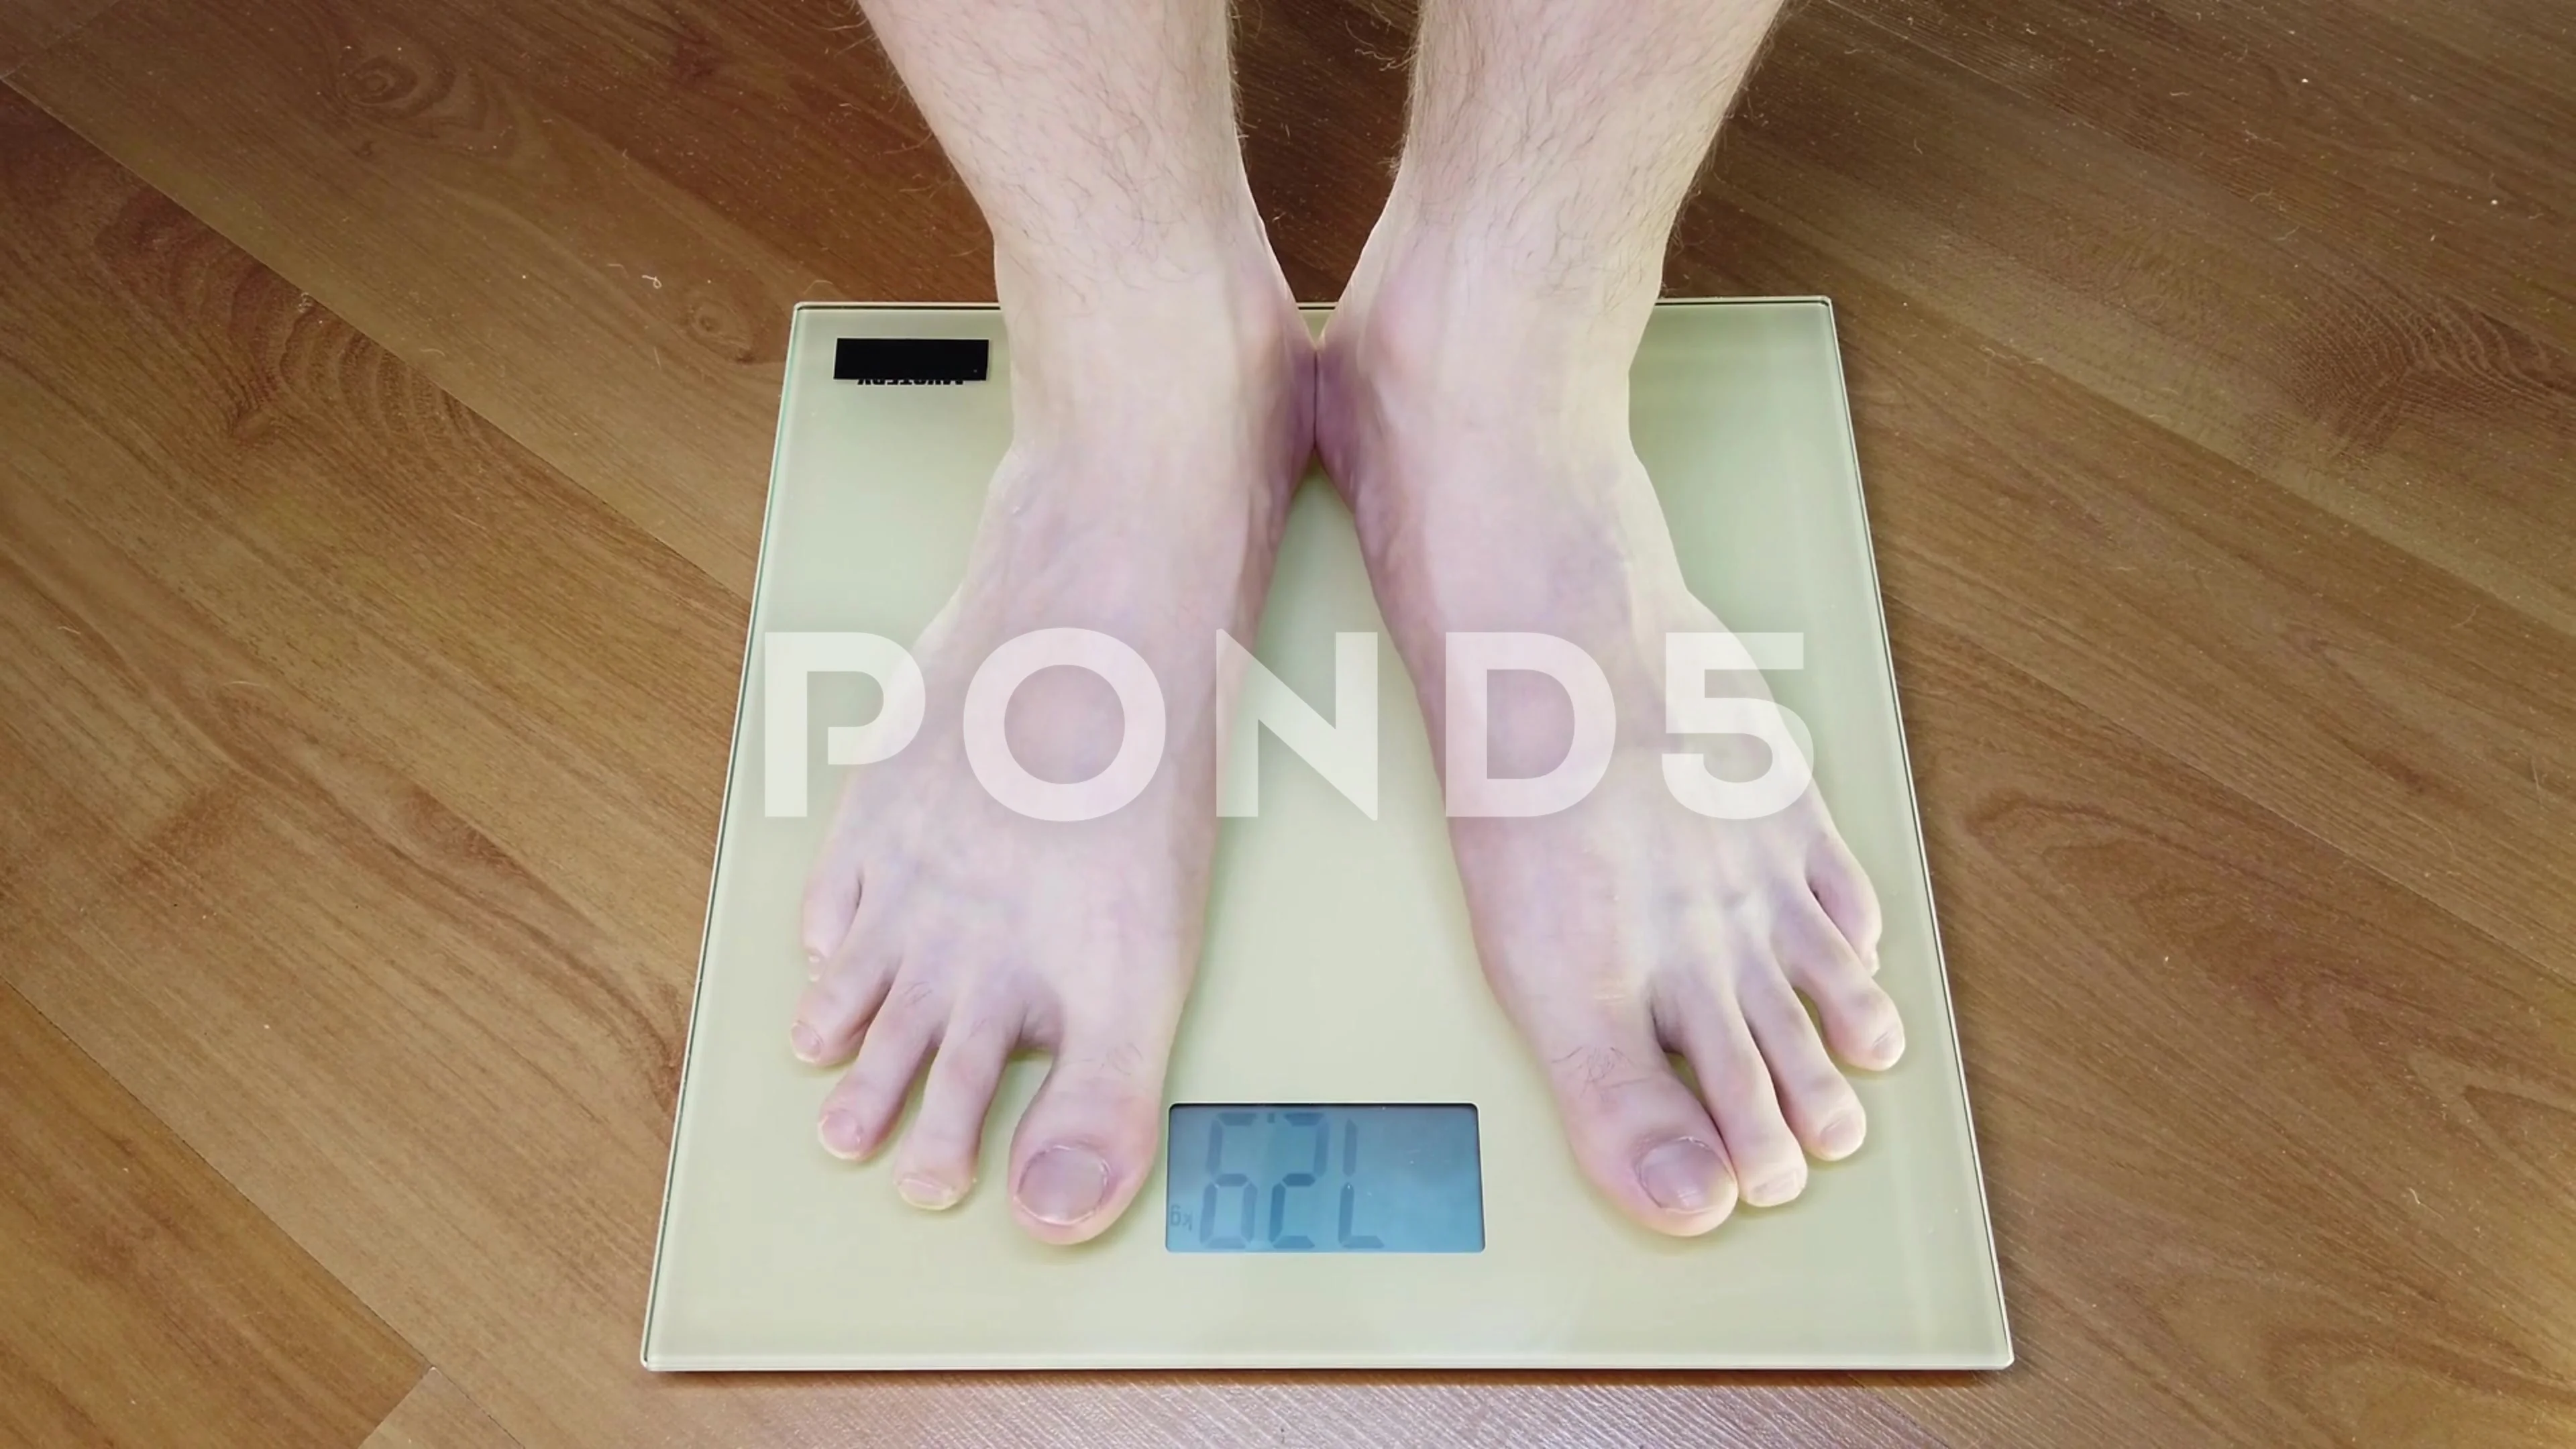 Woman On Scales Measure Weight. Girl Leg, Stock Video